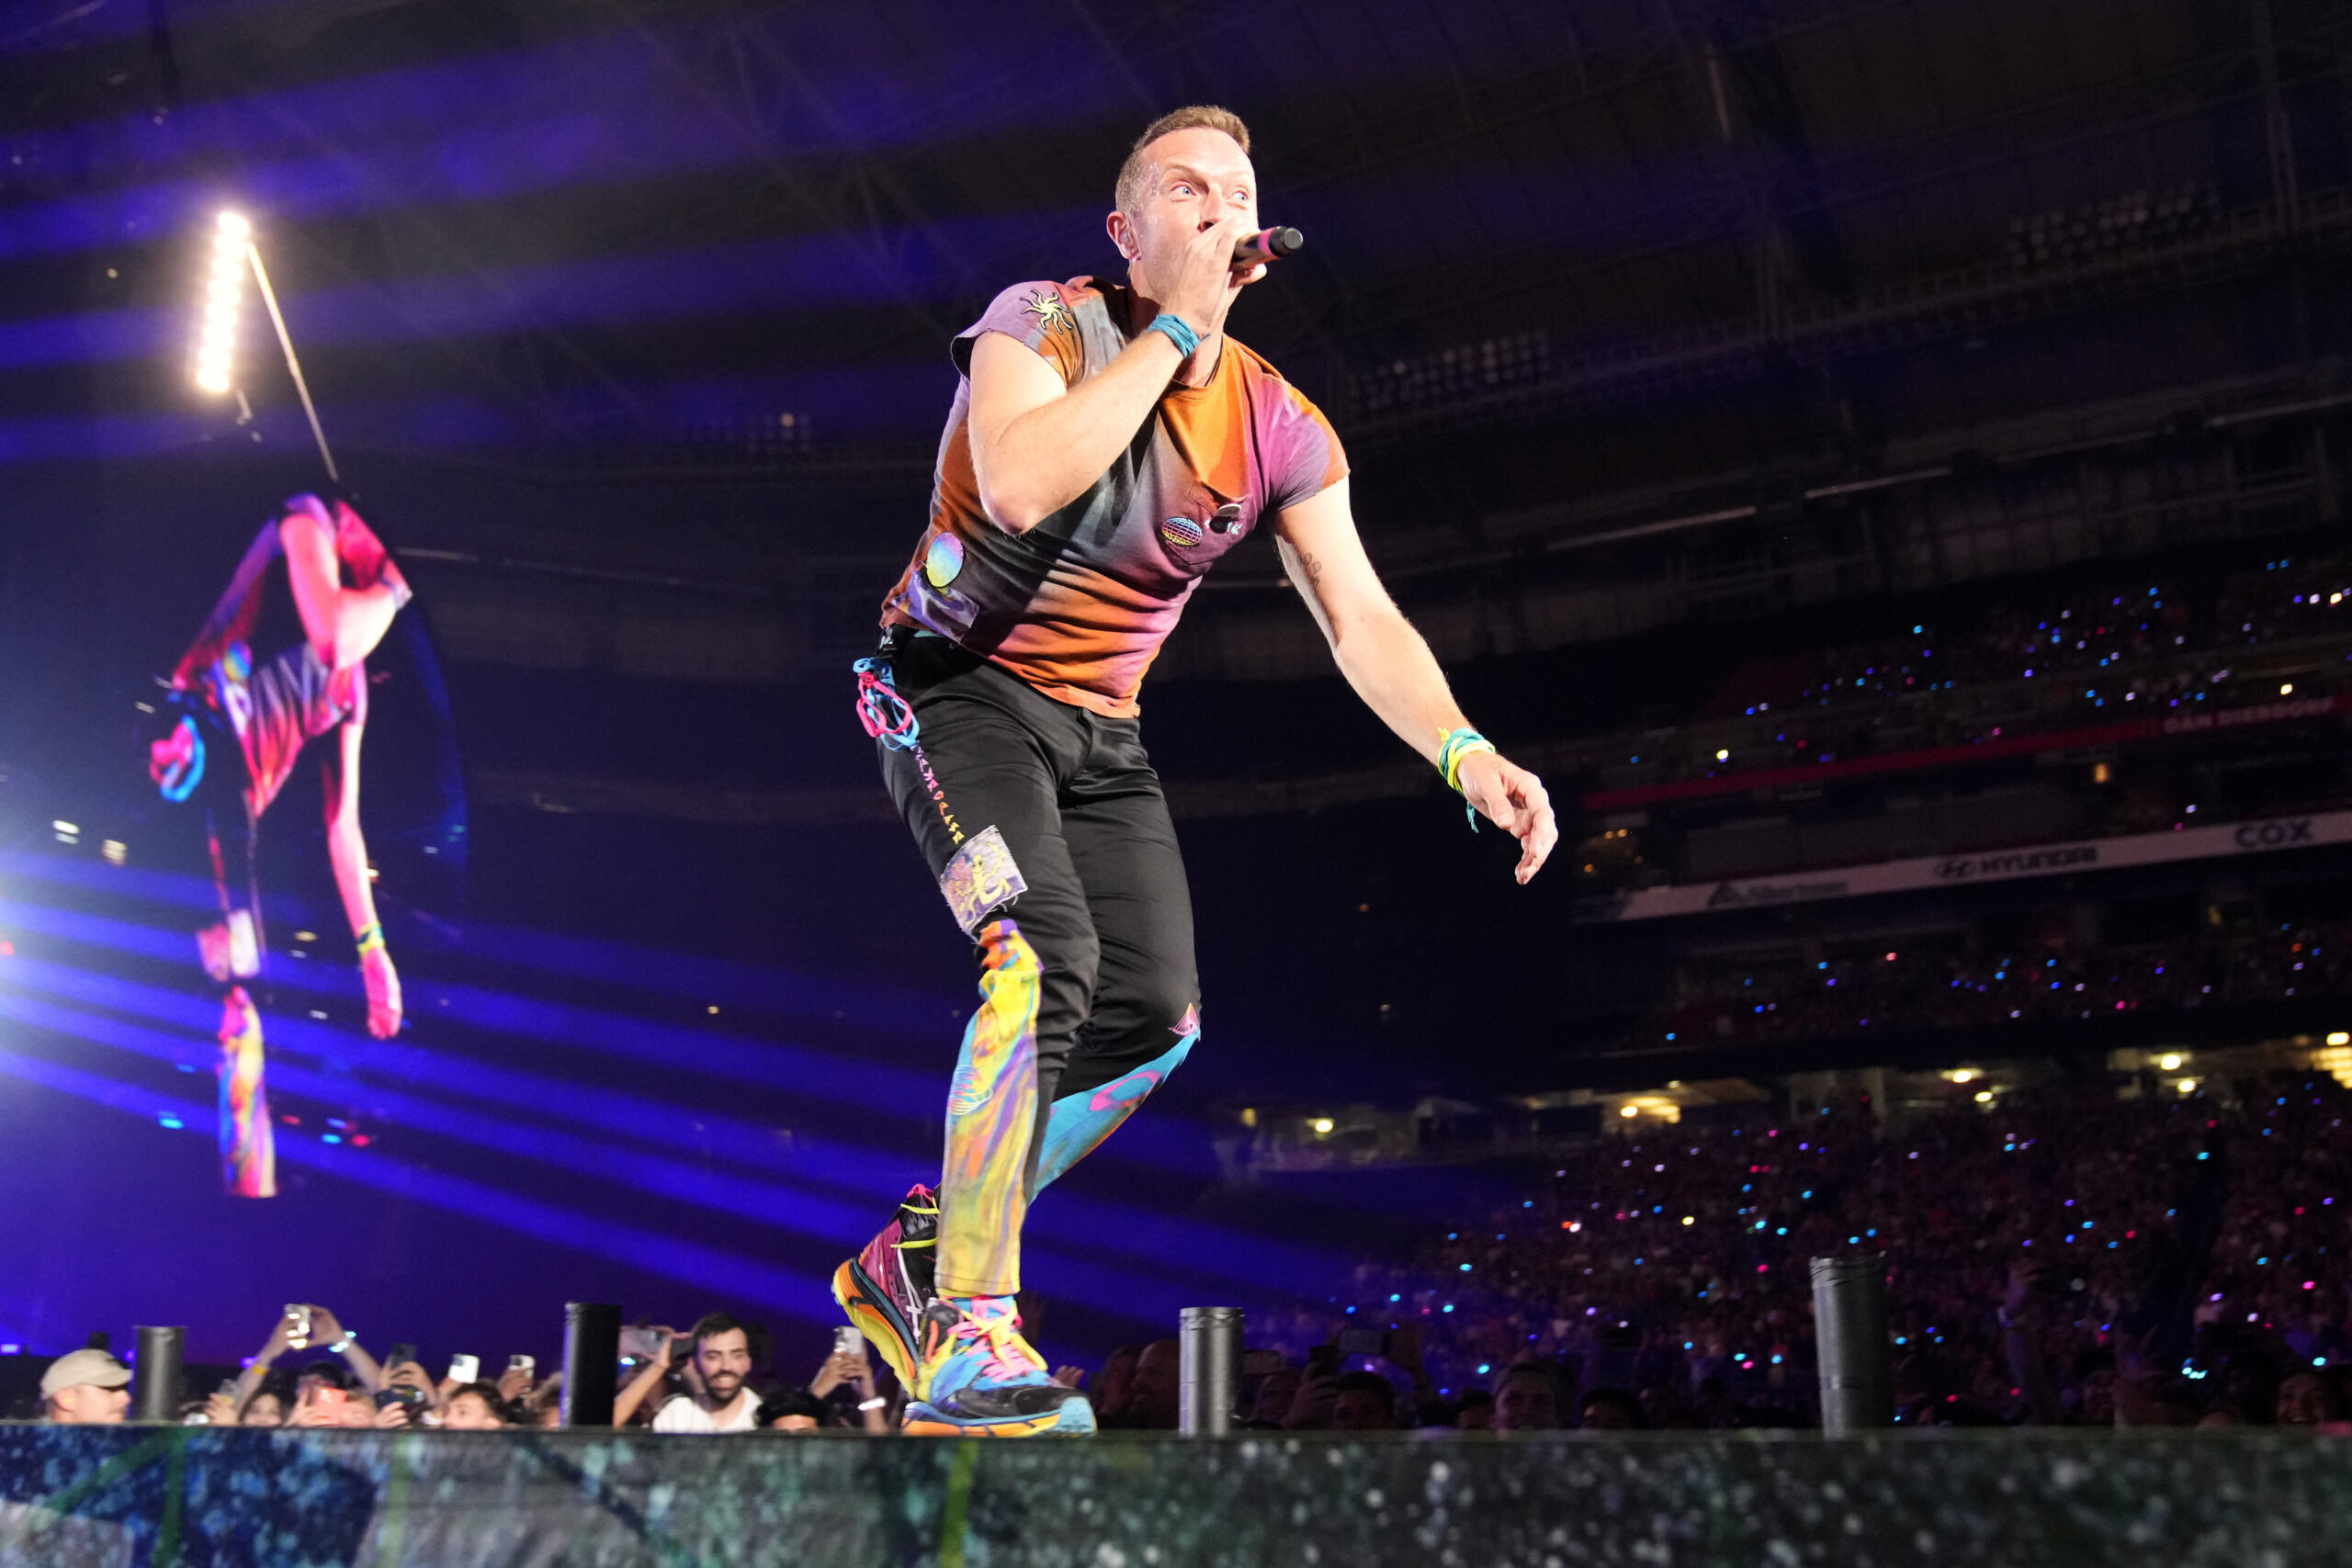 Chris Martin of Coldplay performs during the band's Music of the Spheres world tour on Thursday, May 12, 2022, at State Farm Stadium in Glendale, Ariz. (Photo by Rick Scuteri/Invision/AP)